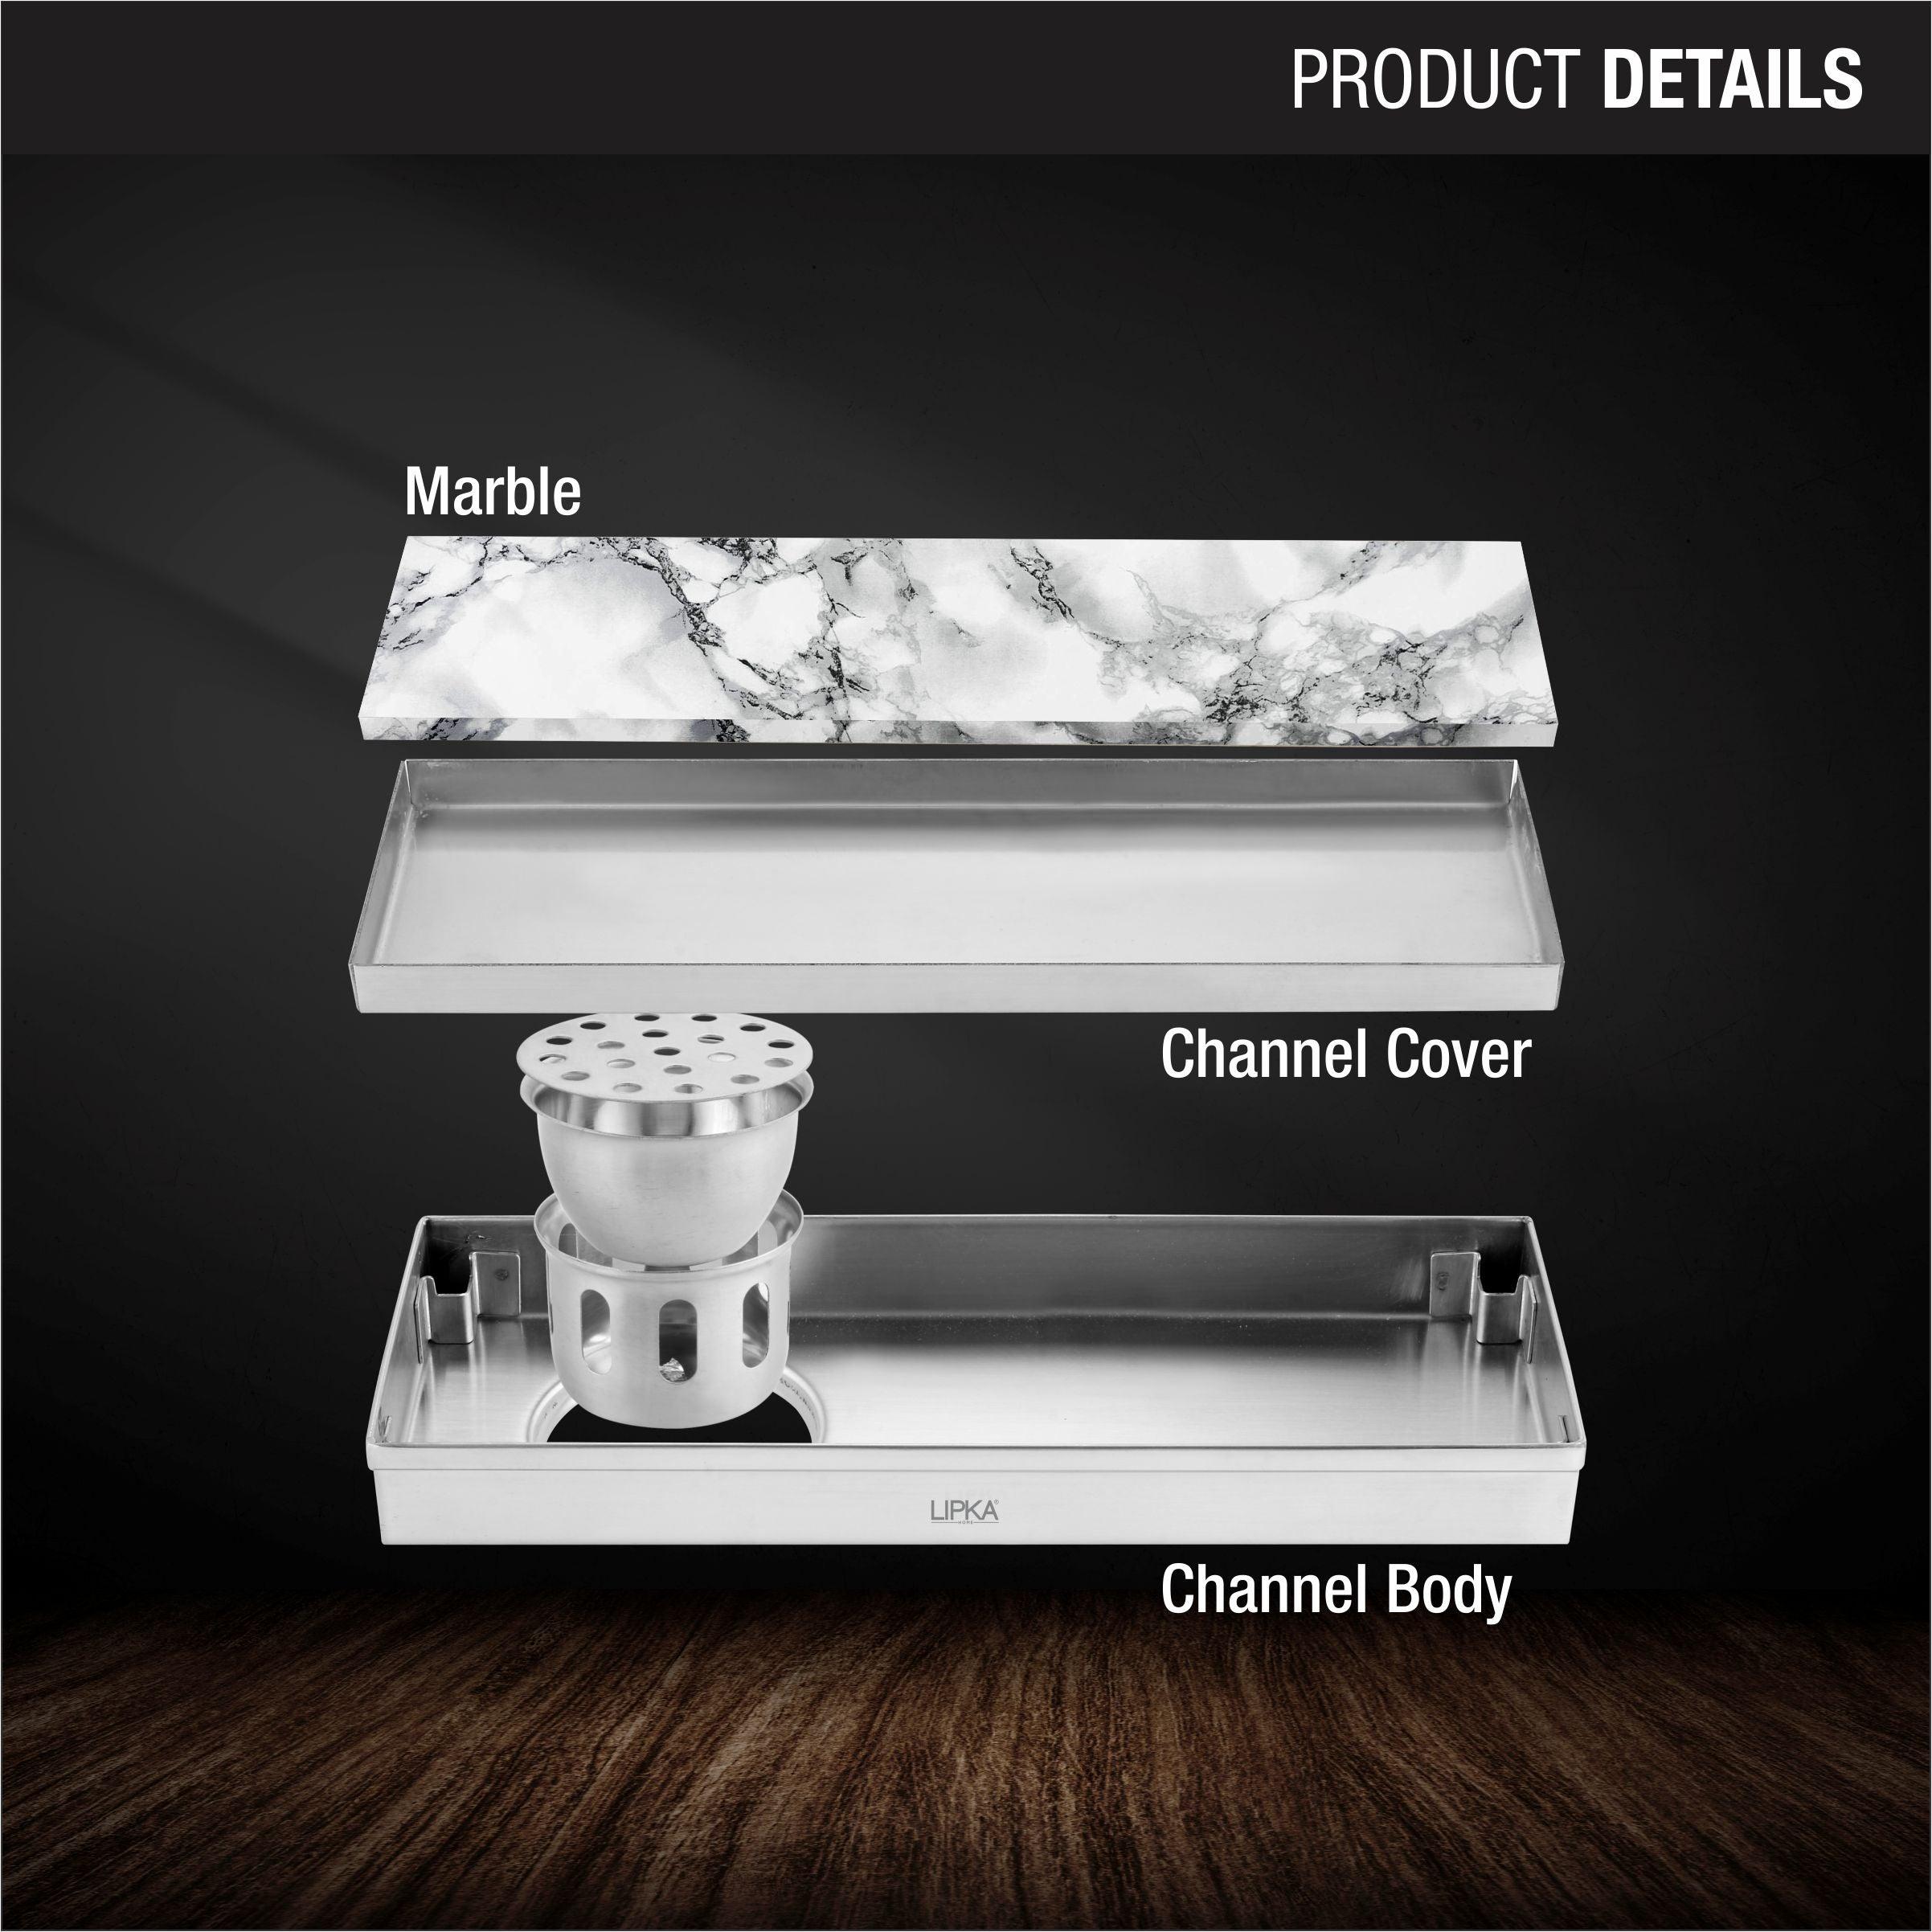 Marble Insert Shower Drain Channel (12 x 5 Inches) product details